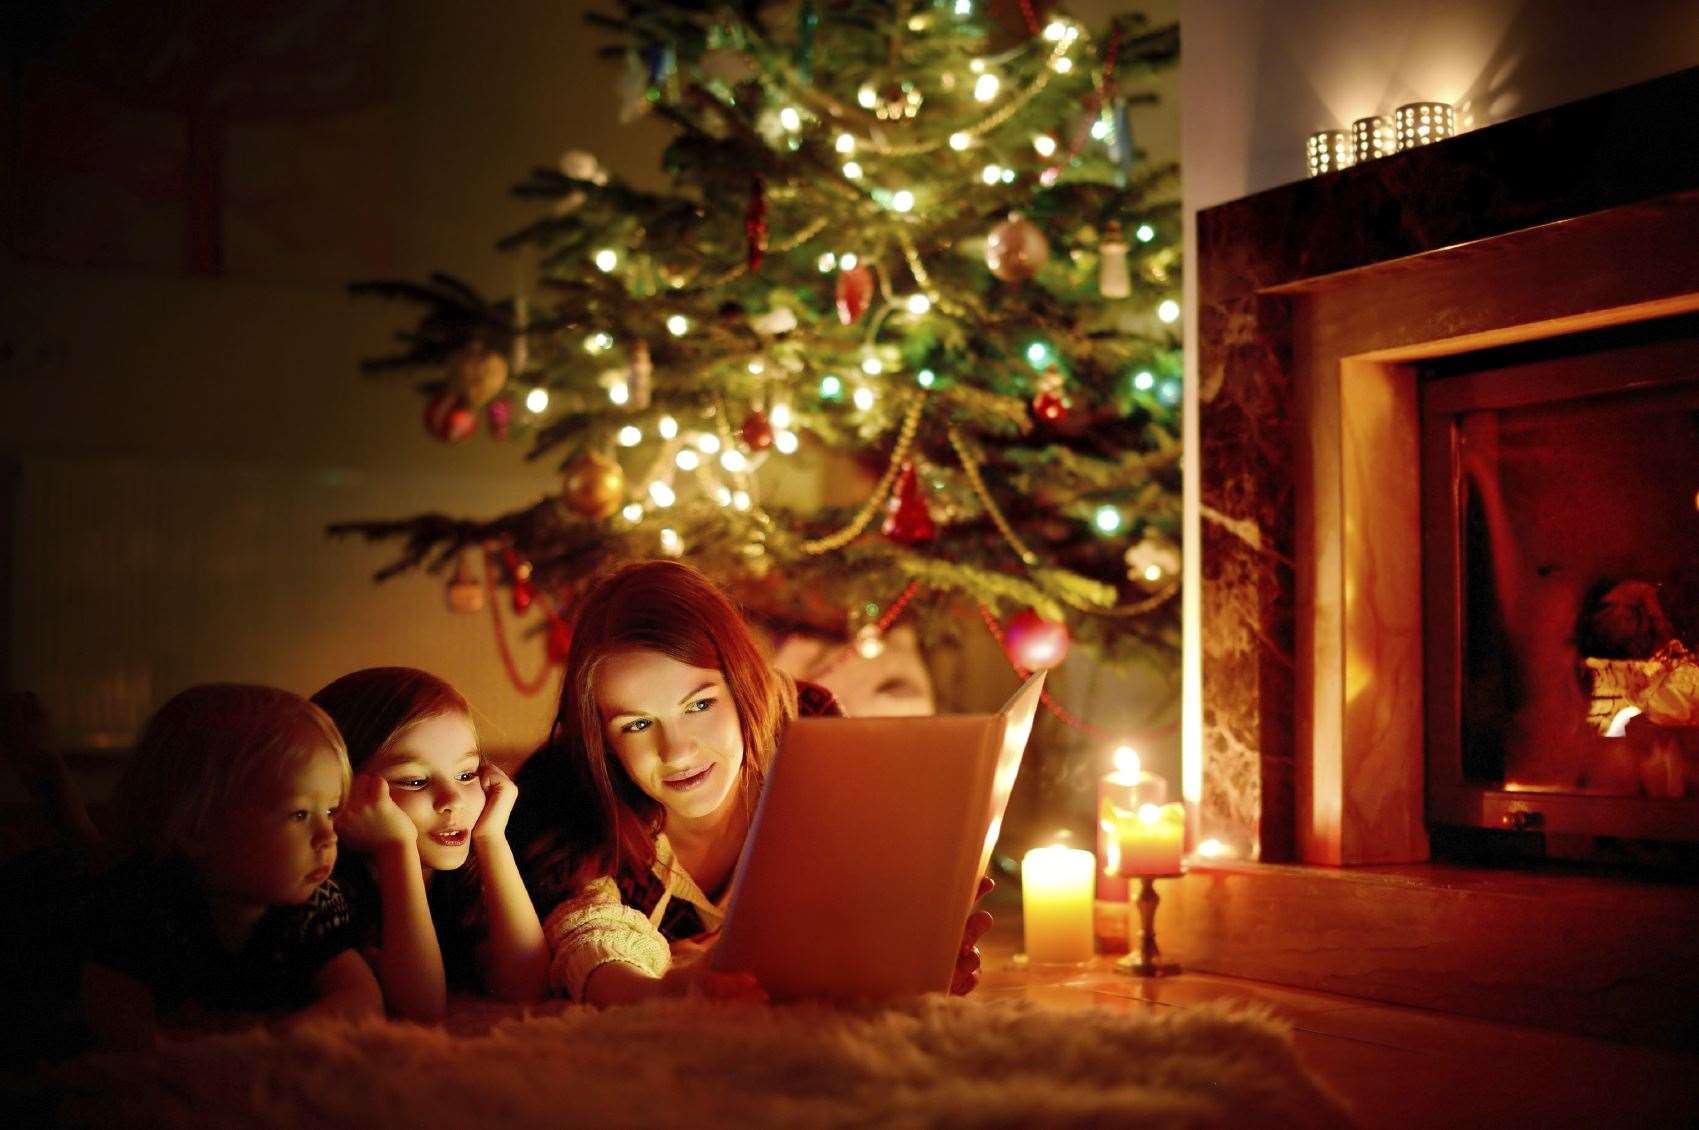 Some parents say bringing out a Christmas Eve box encourages their family to enjoy a quiet evening together. Image: iStock